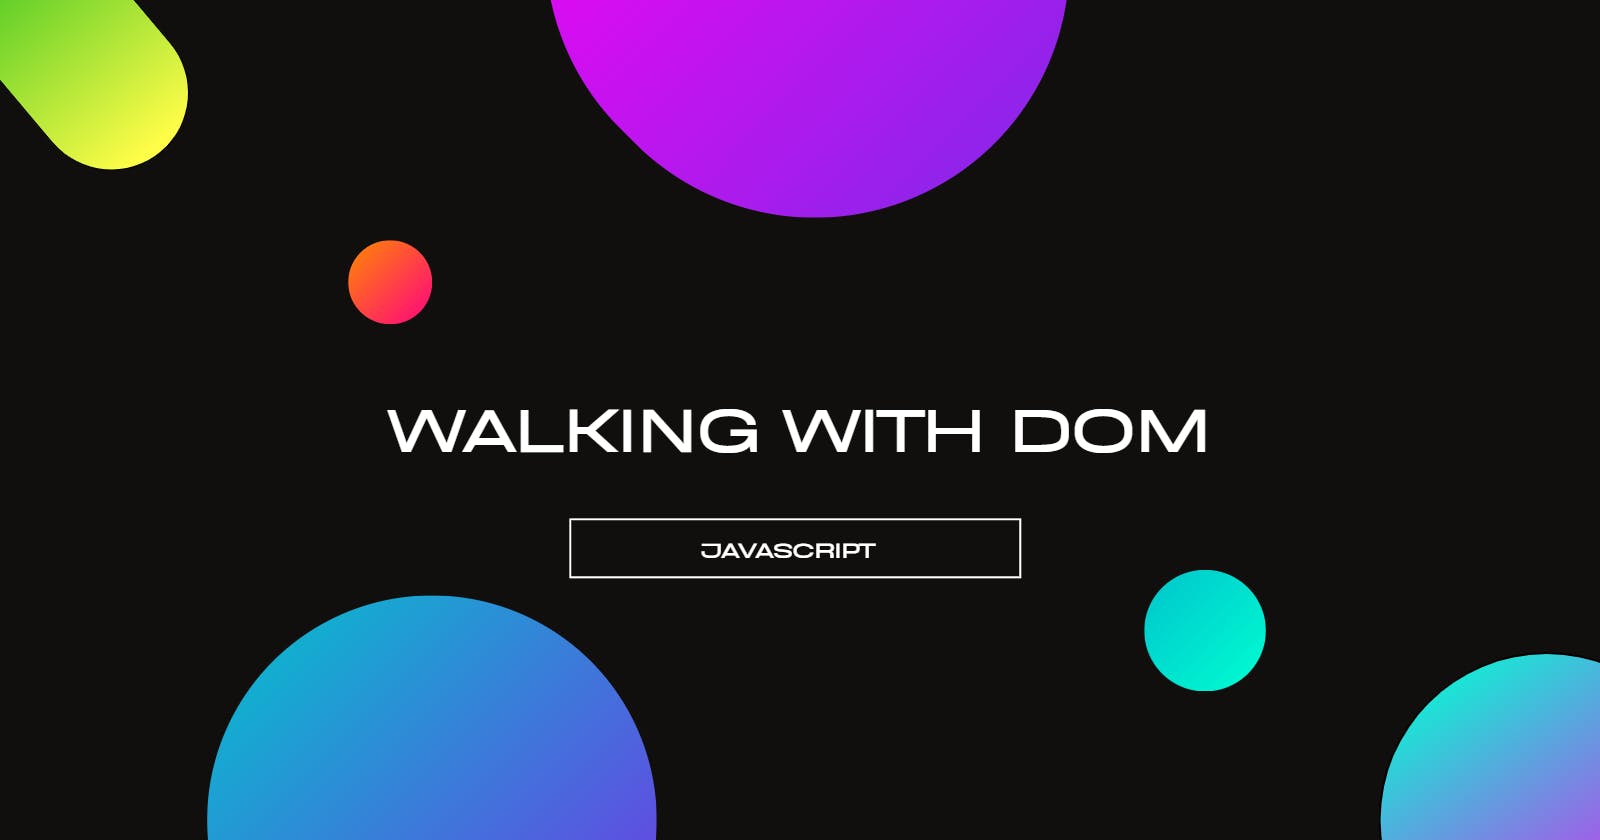 Working With Dom